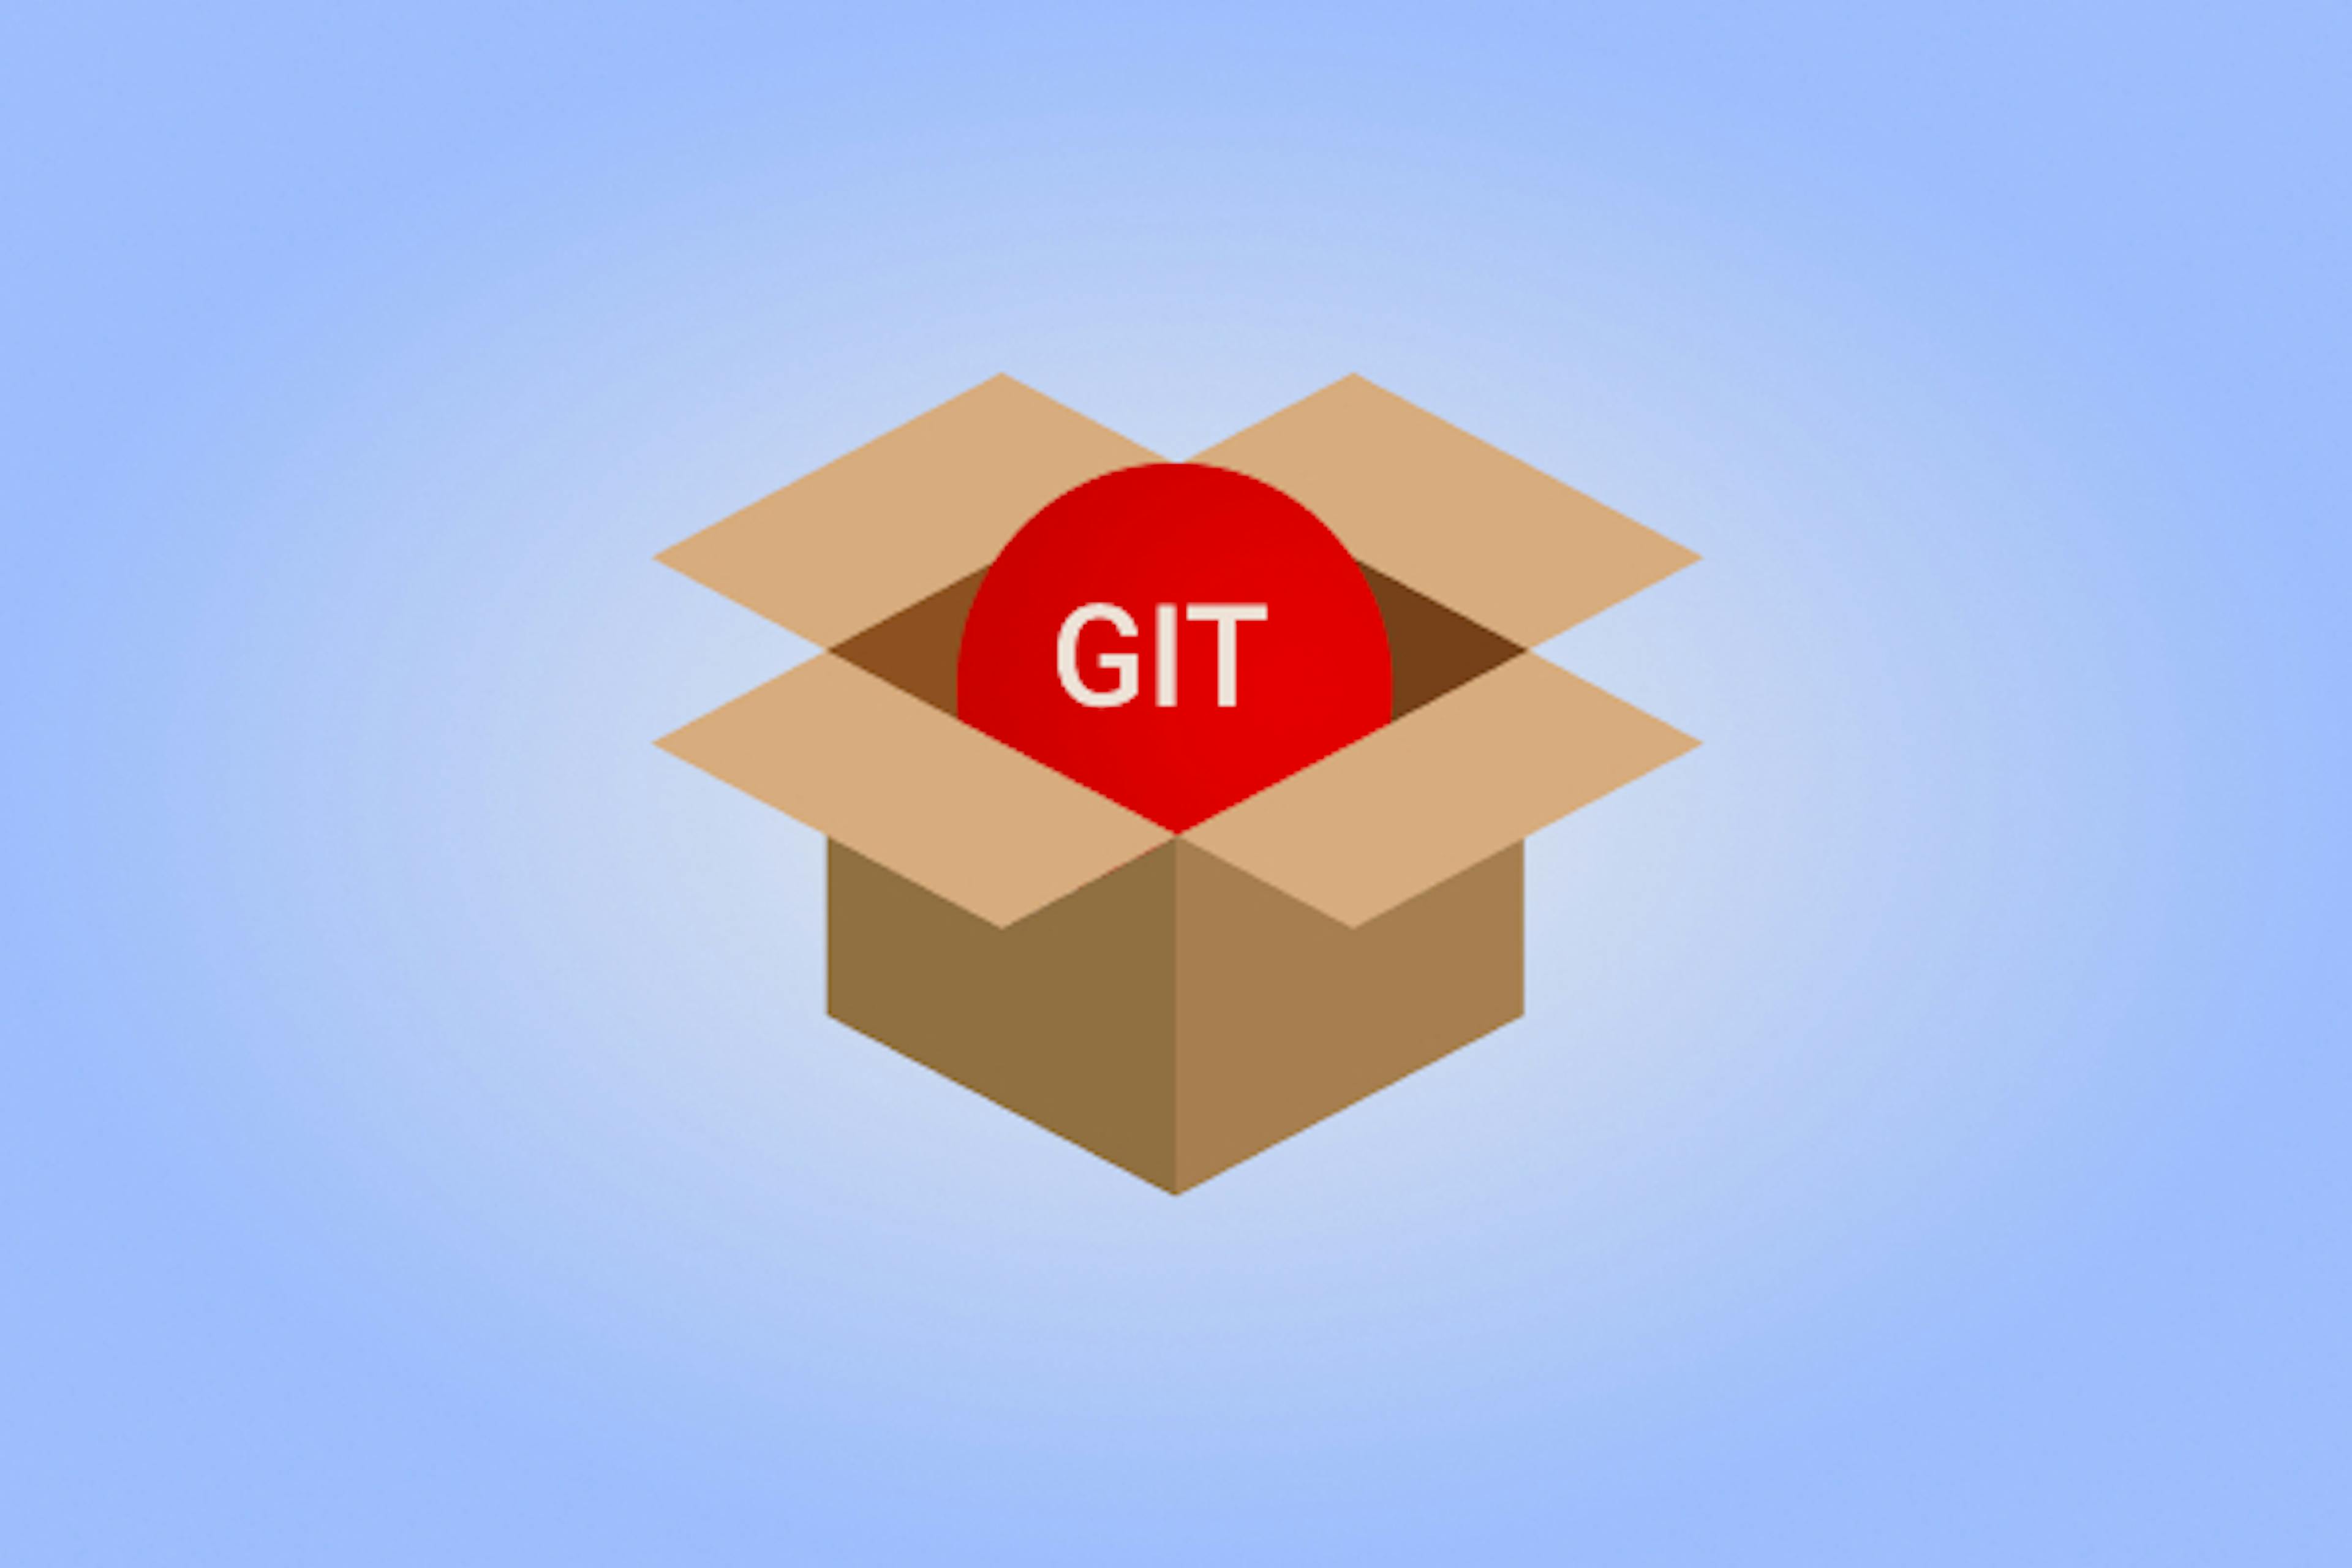 /stashing-in-git-0x483bdy feature image